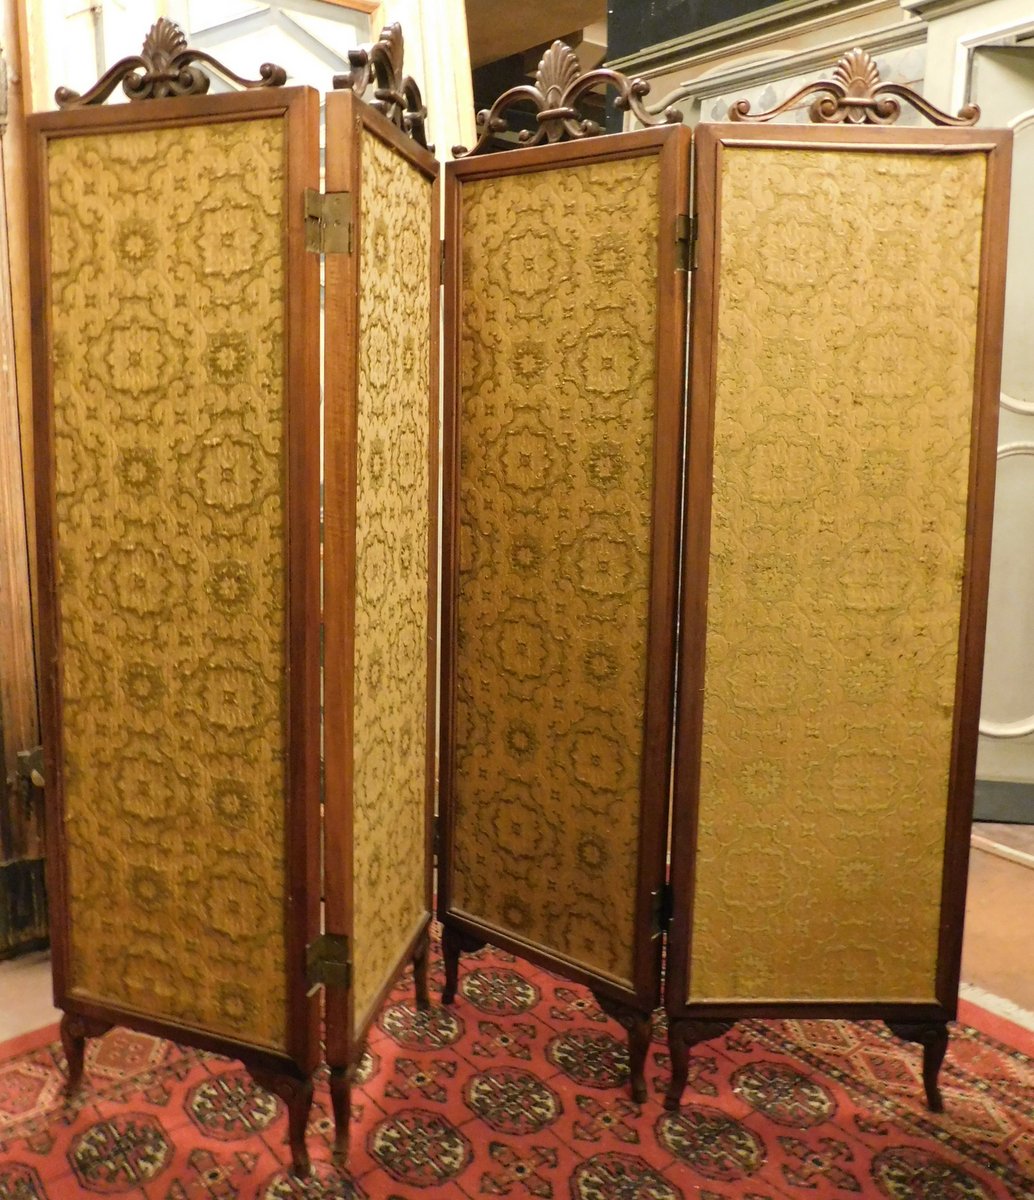 dars490 - dividers screen in wood and fabric, 19th century, cm w 180 x h 166